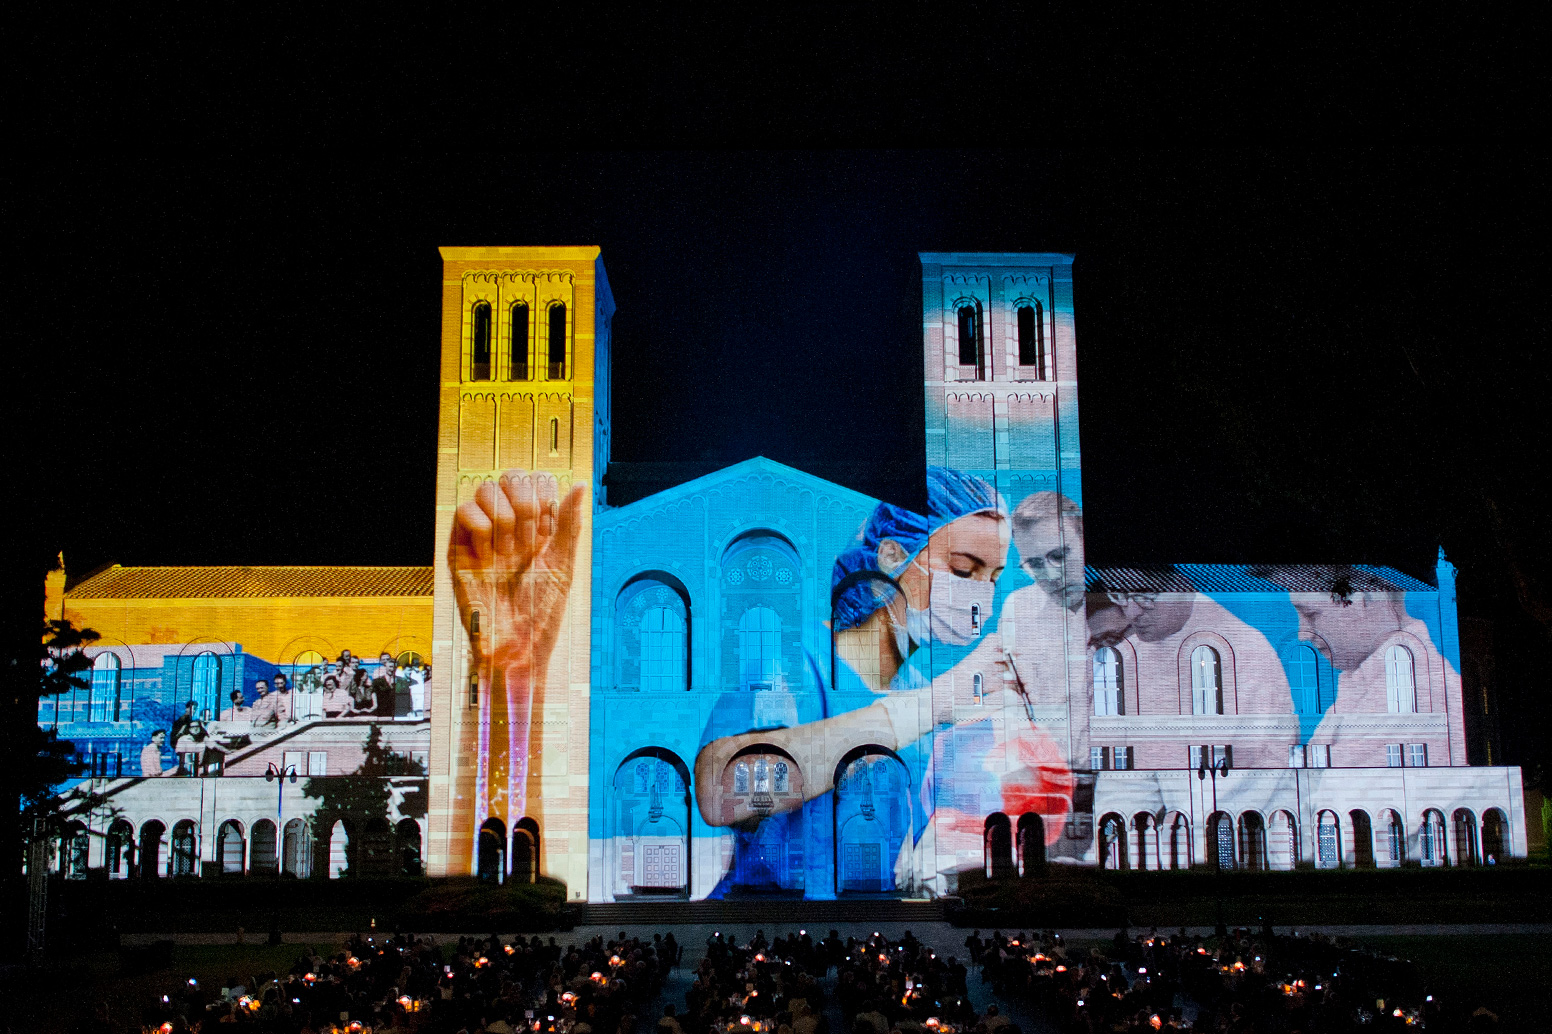 People sit in front of Royce Hall at night and watch as the facade is lit by a light show that depicts health and medical professionals.